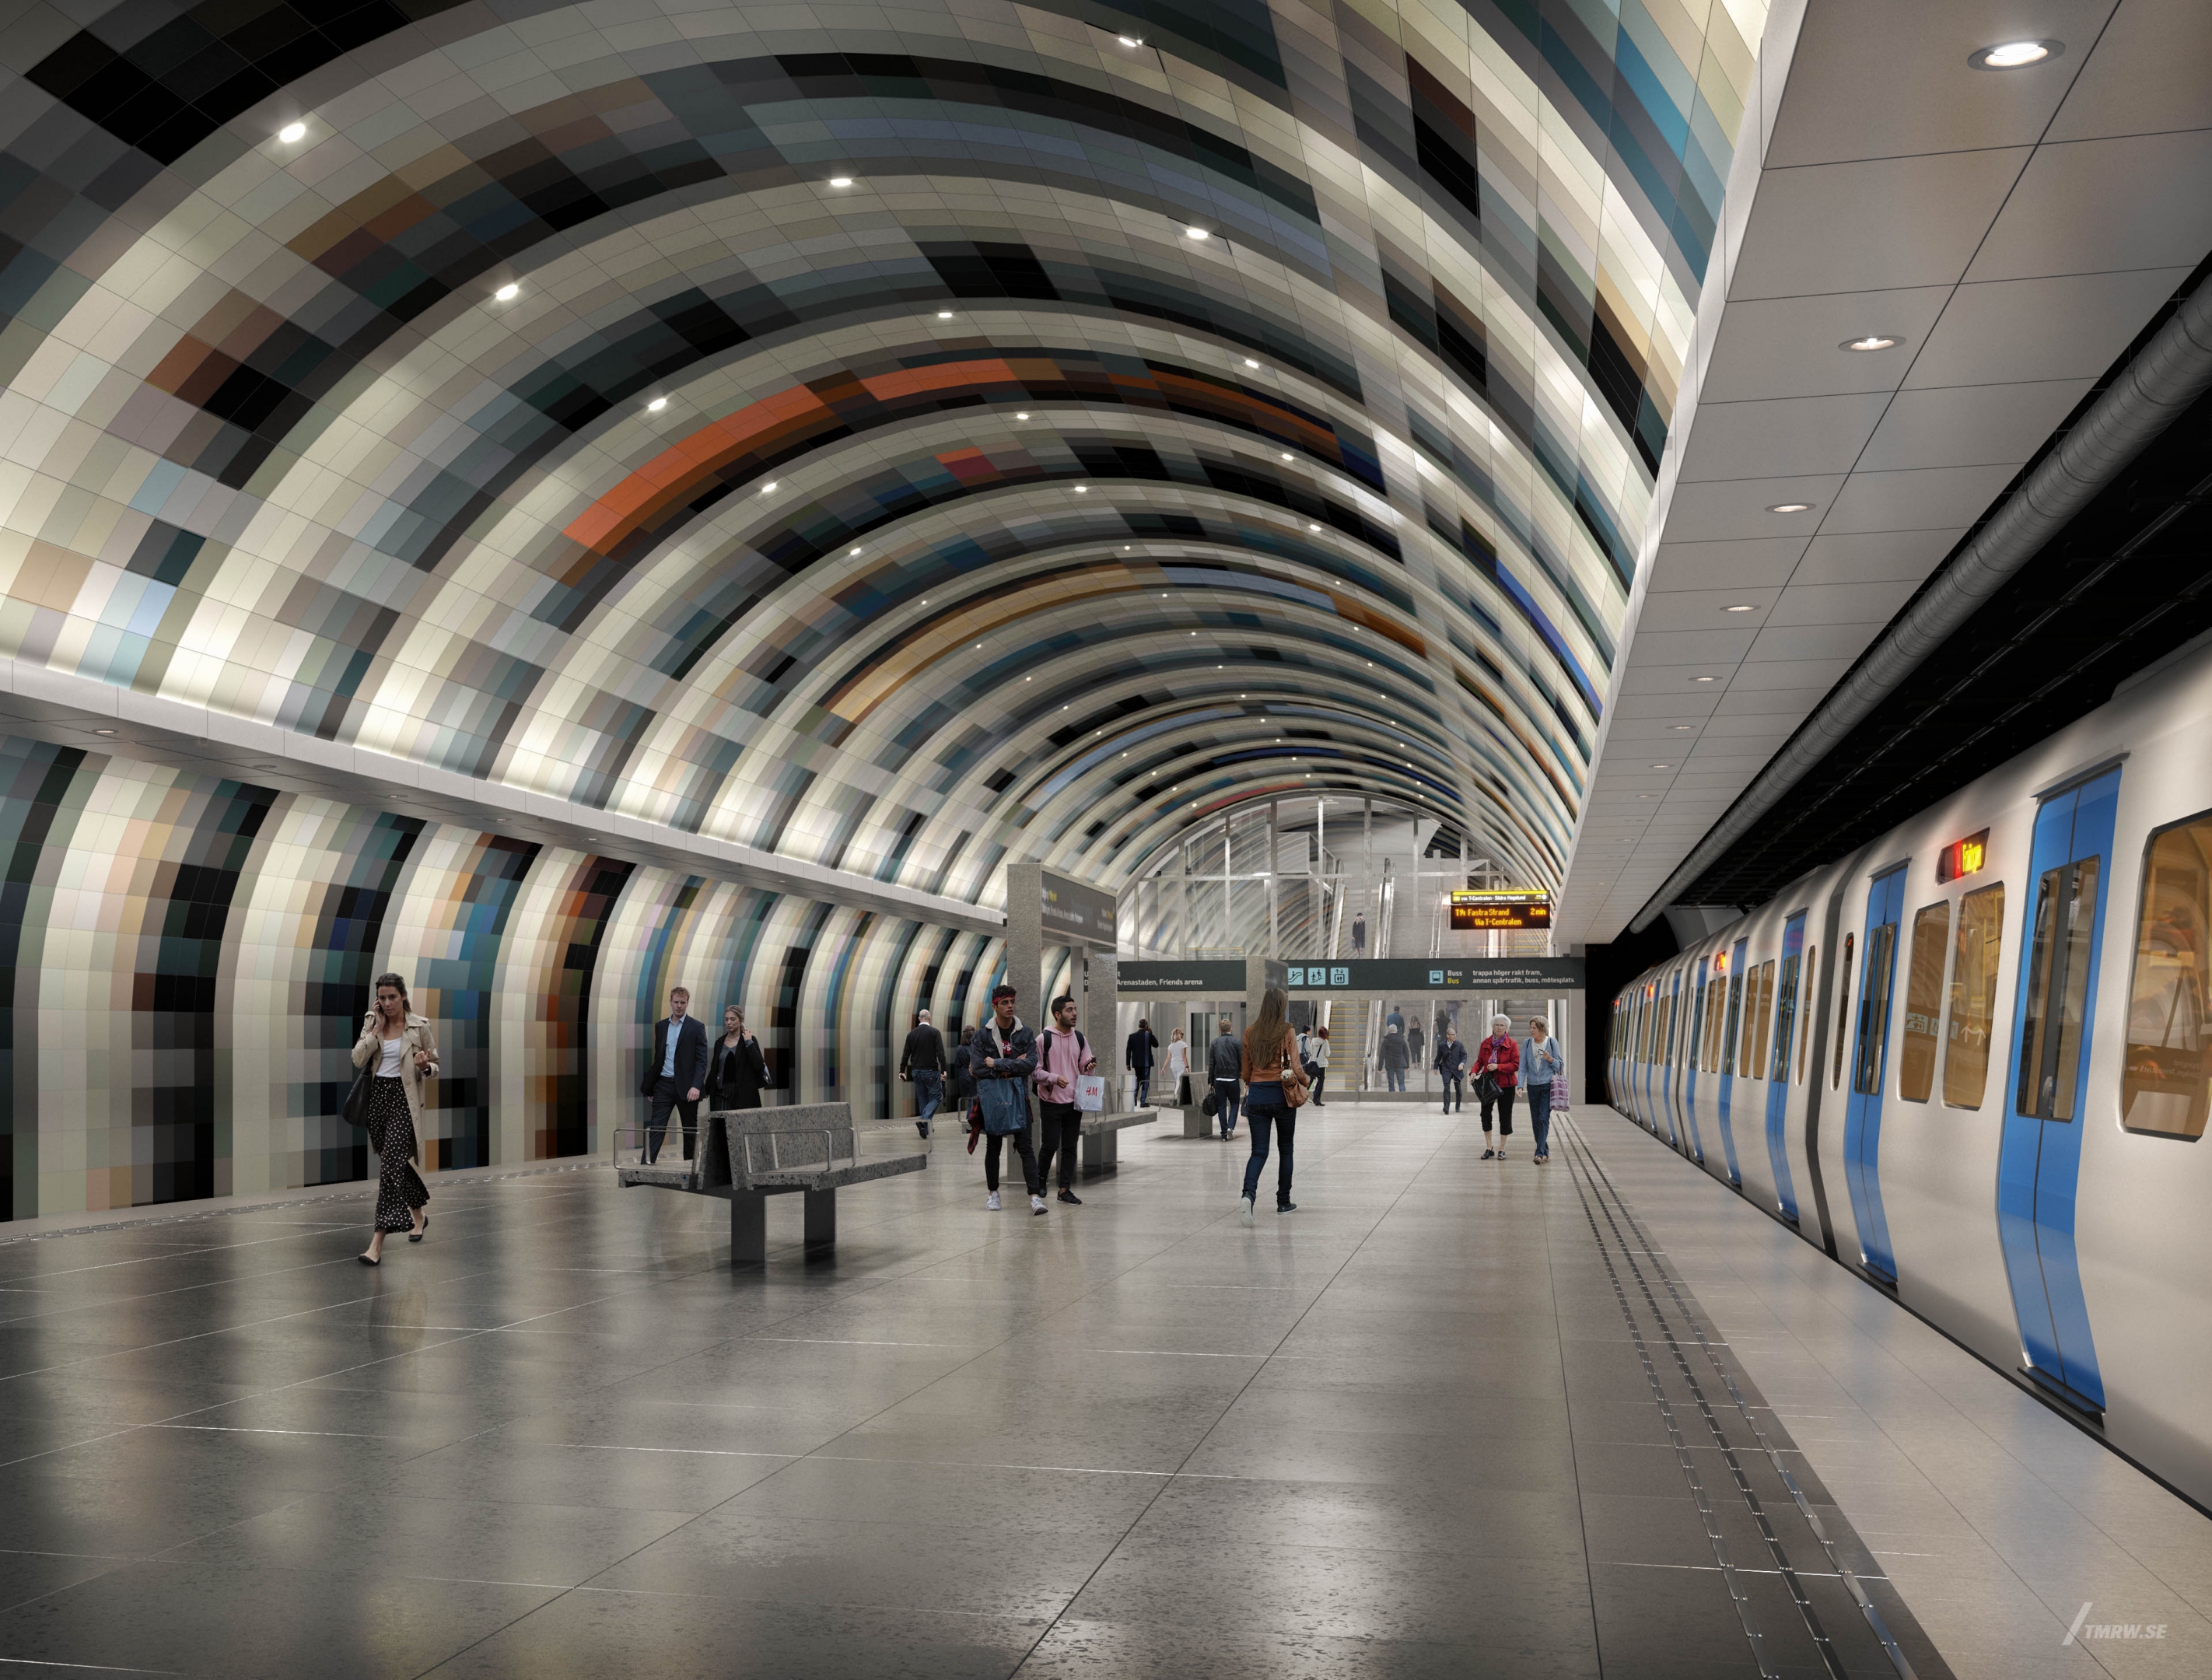 Architectural visualization of Arenastaden for Rundquist, interior of a subway station, location stockholm